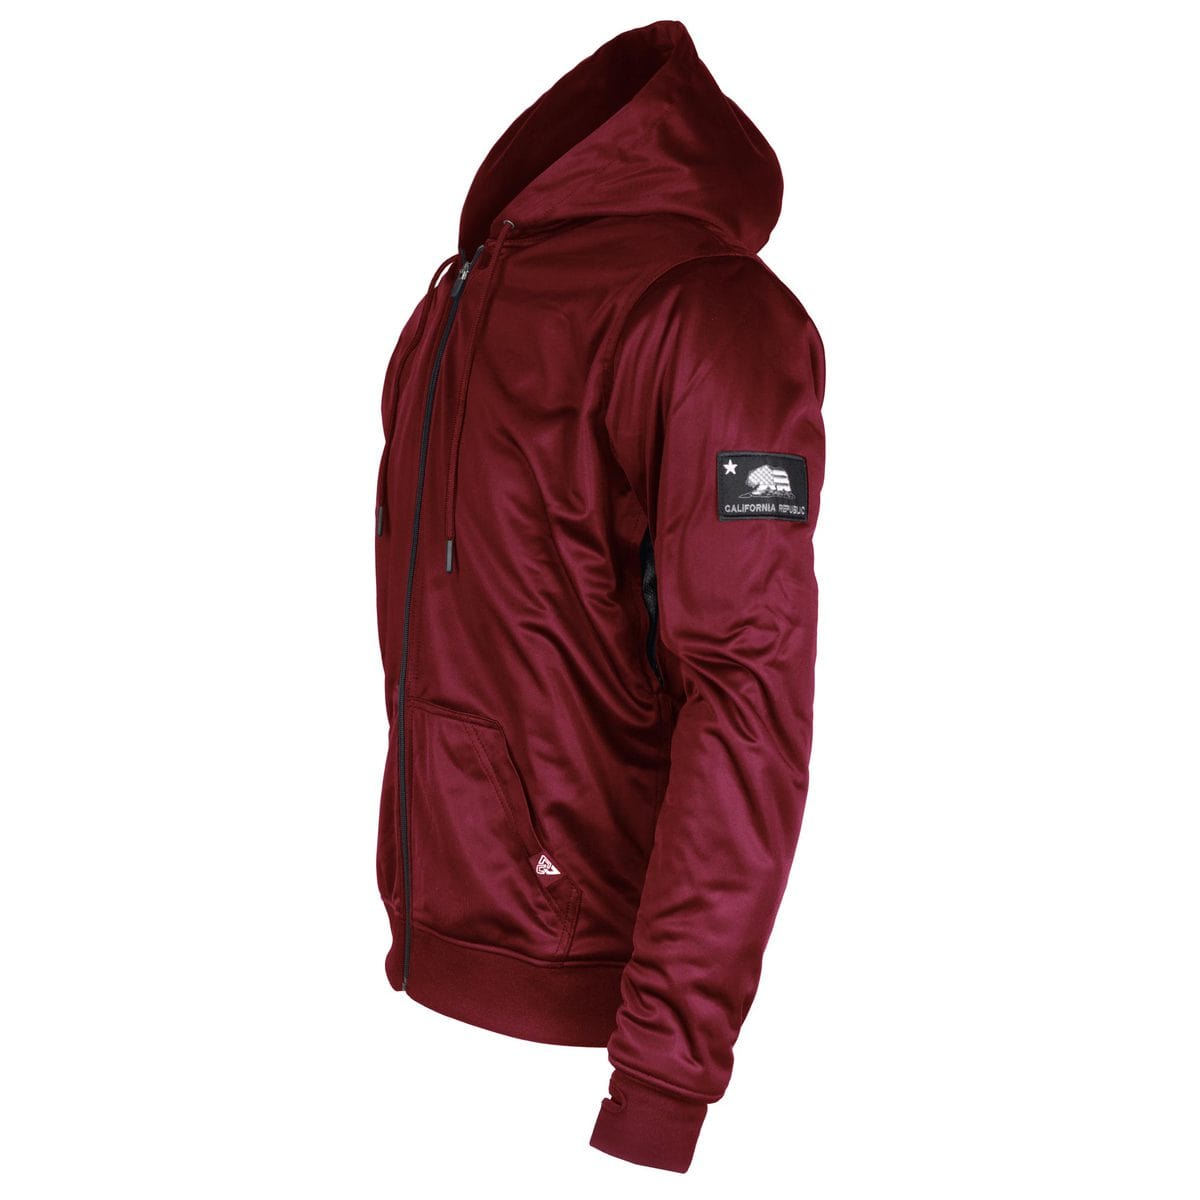 Red Maroon Solid Ultra Protective Hoodie